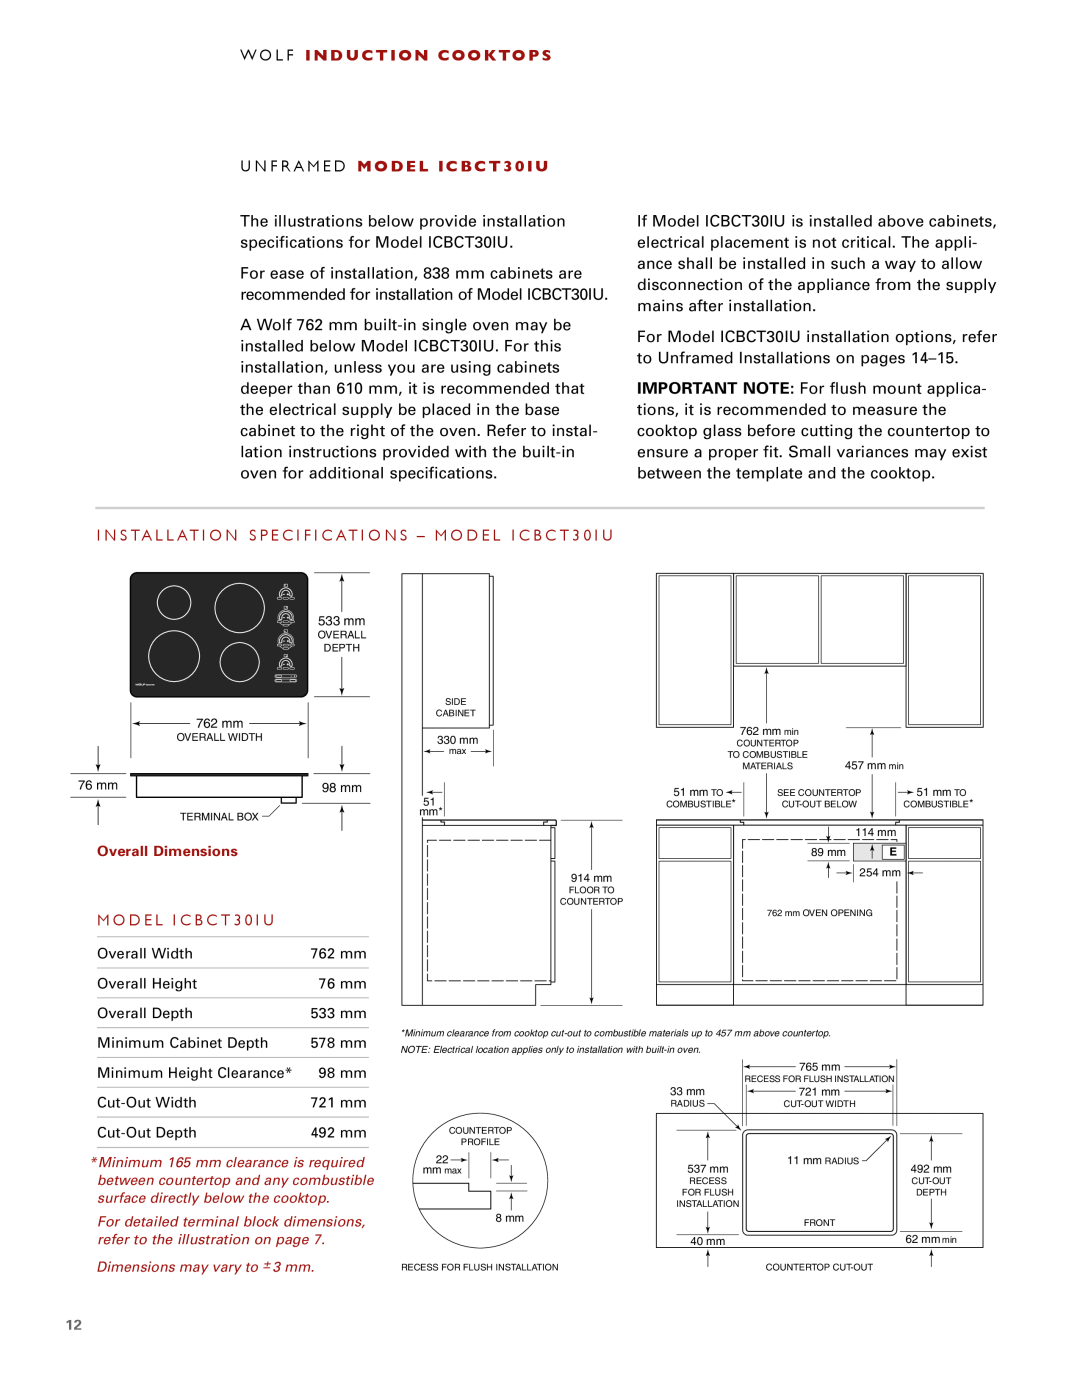 Wolf installation instructions U N F R A M E D MODEL ICBCT30IU, M O D E L I C B C T 3 0 I U, W O L F Induction Cooktops 